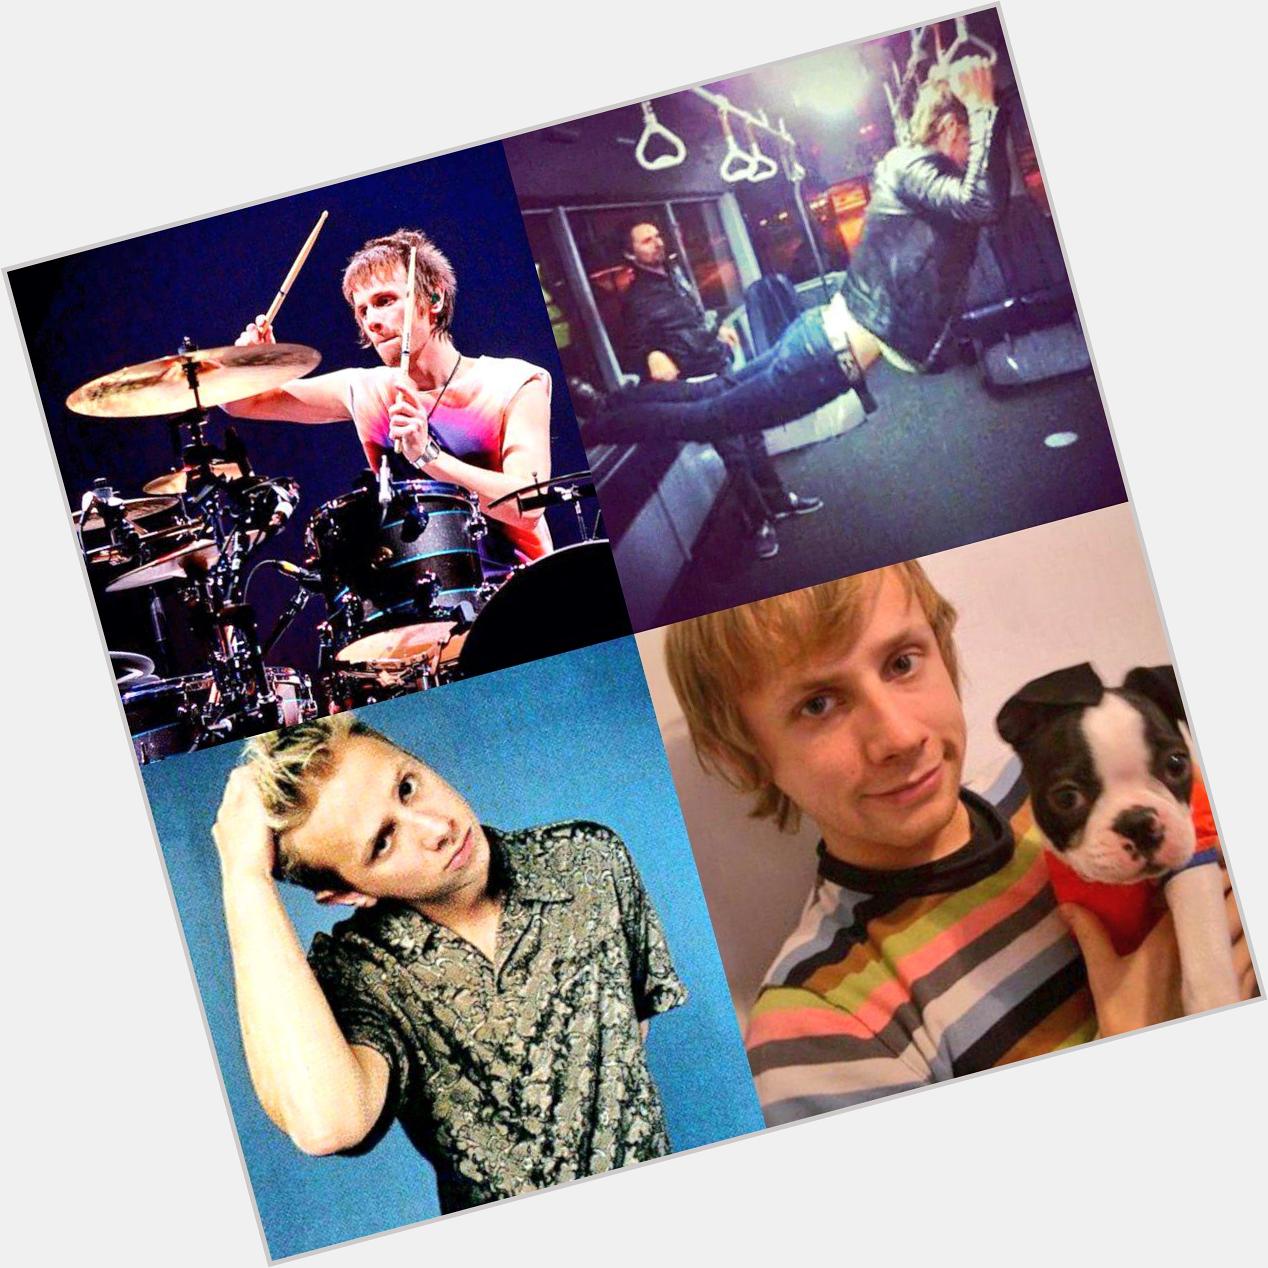  happy birthday! You are the best drummer, hope you have a great day!  